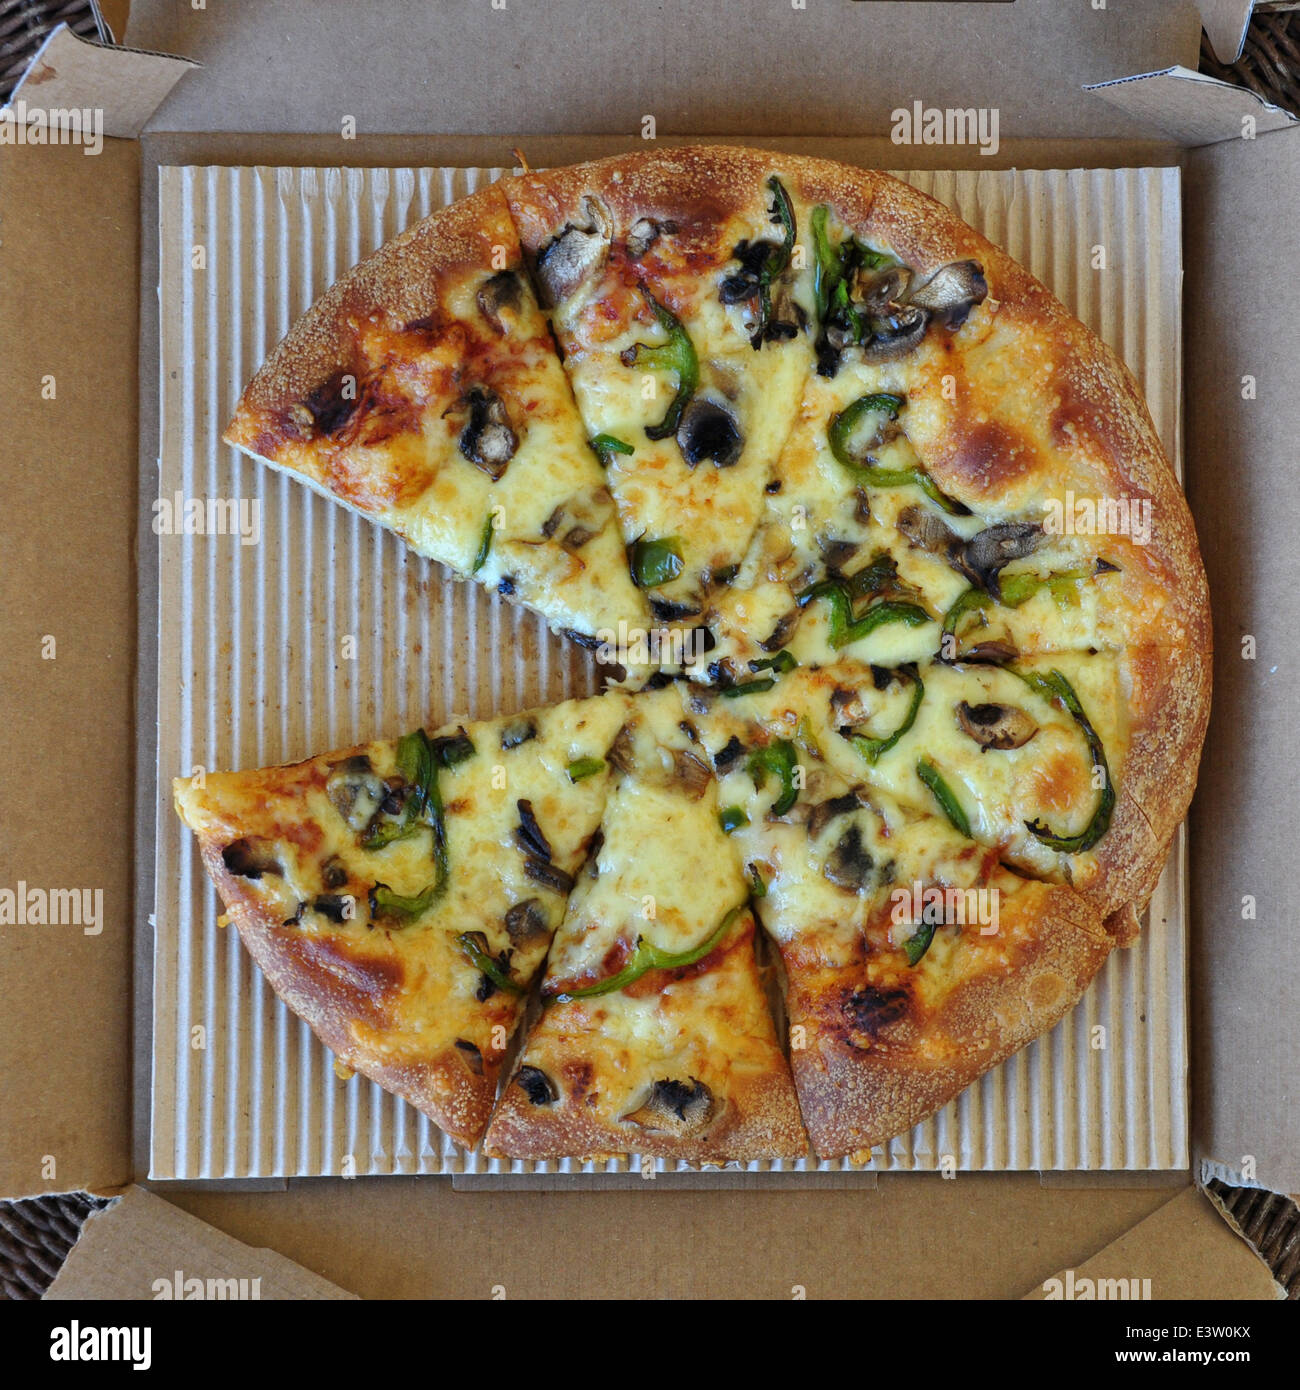 Takeaway pizza with mushrooms and green pepper in cardboard box. Italian fast food background. Stock Photo